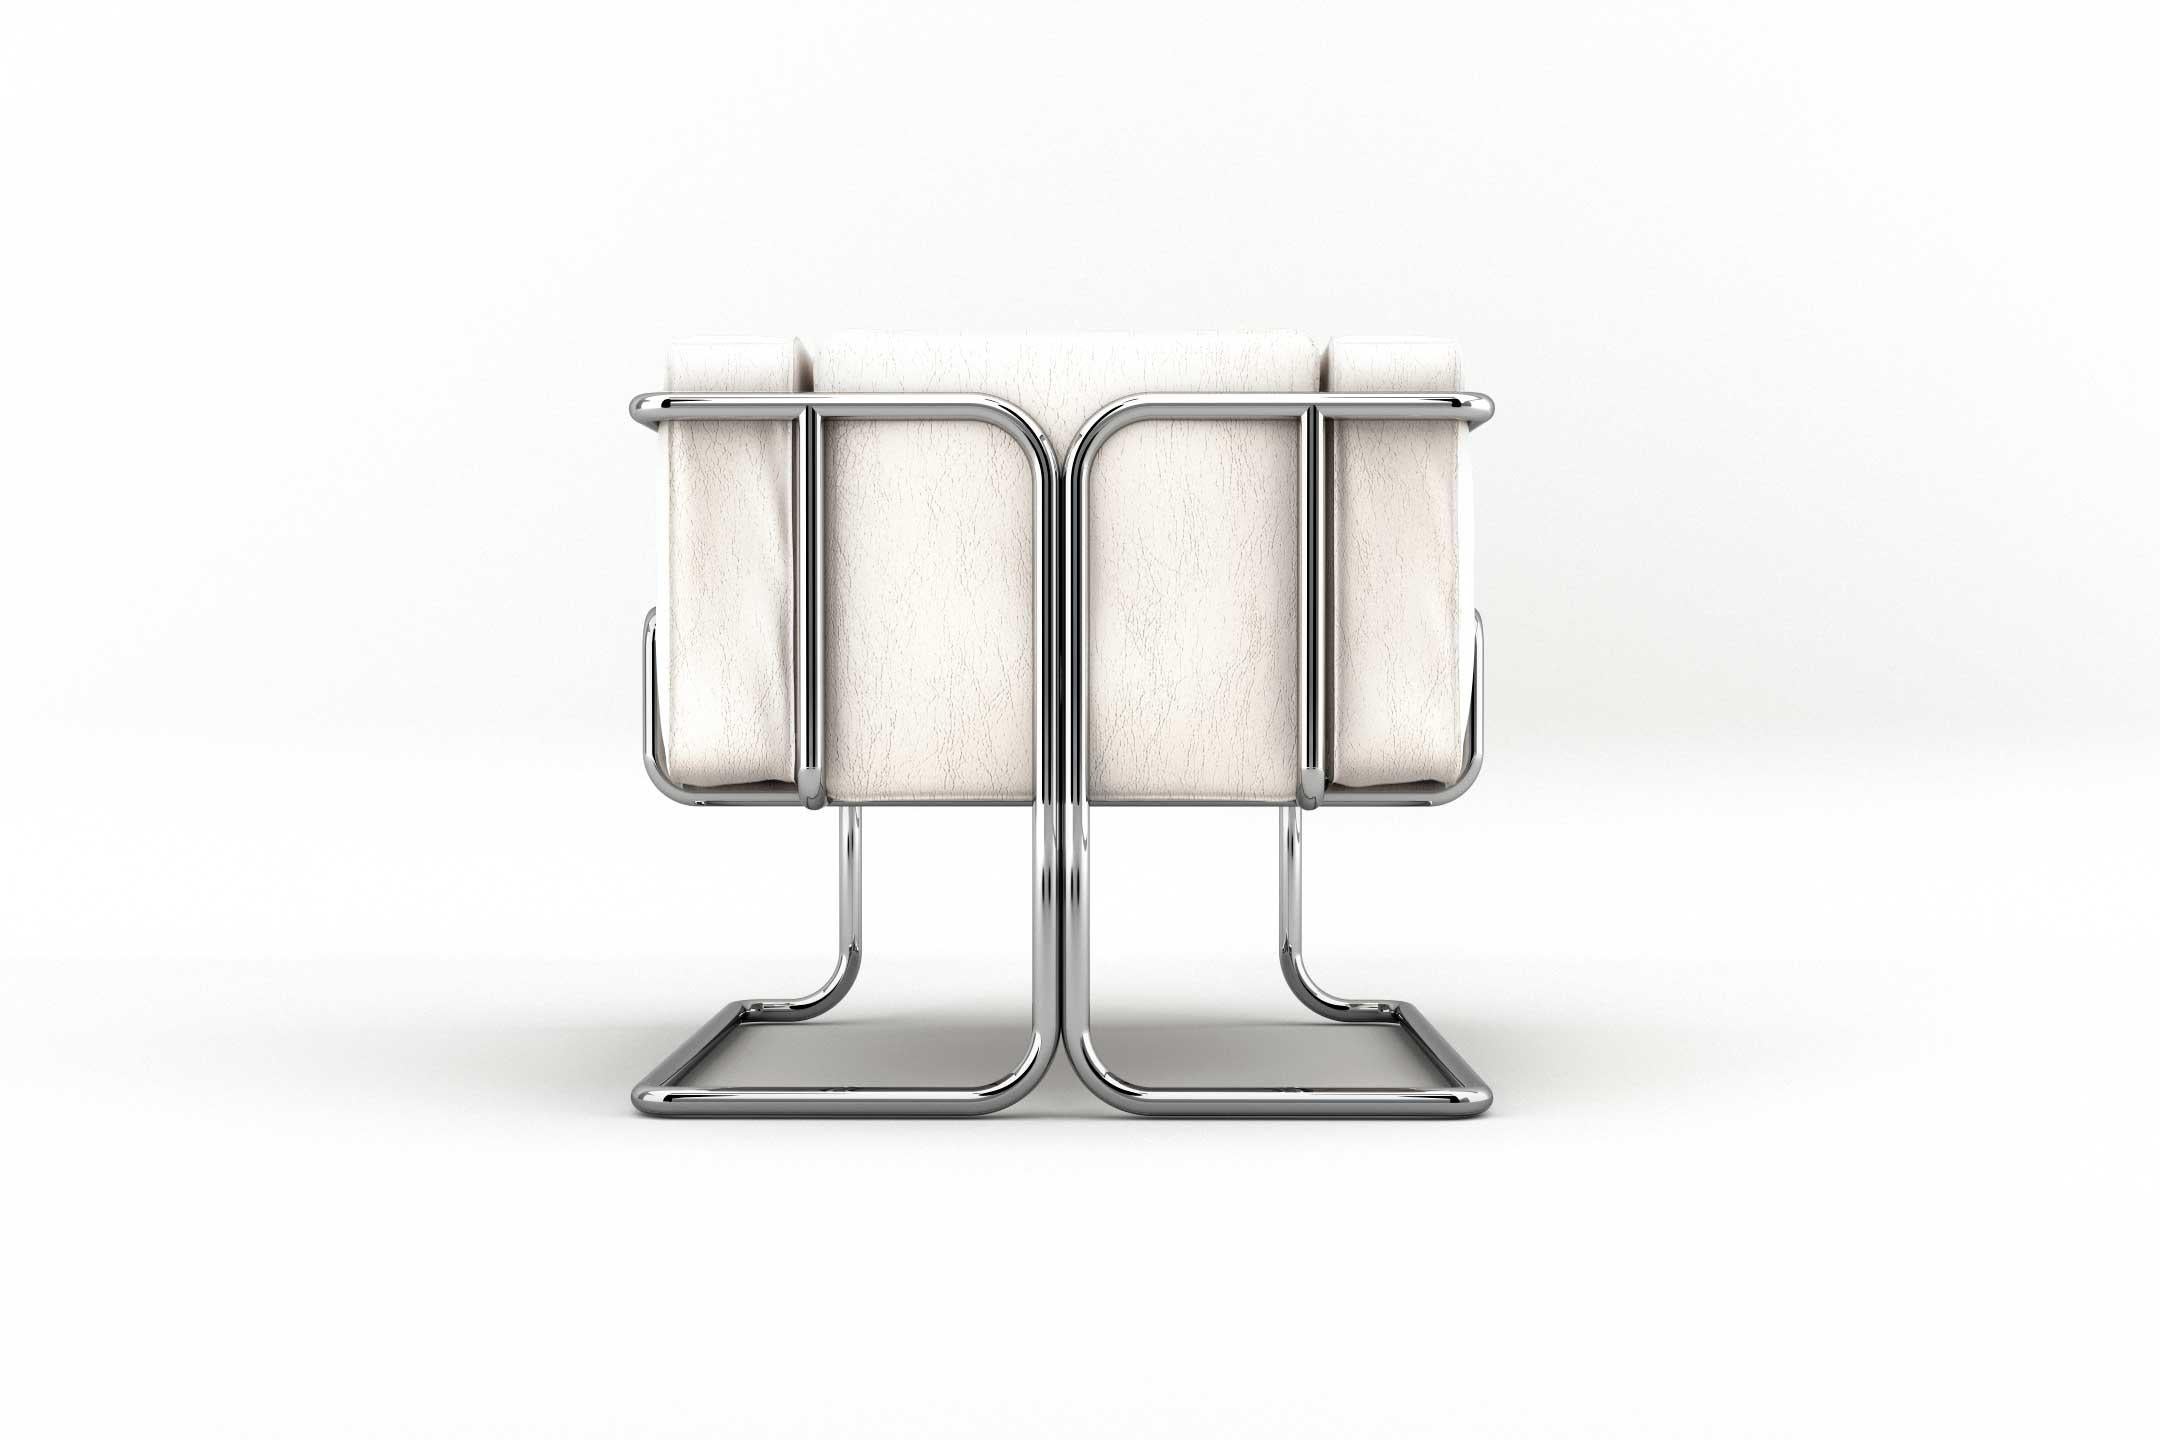 Lotus Armchair - Modern White Leather Sofa with Stainless Steel Legs In New Condition For Sale In London, GB